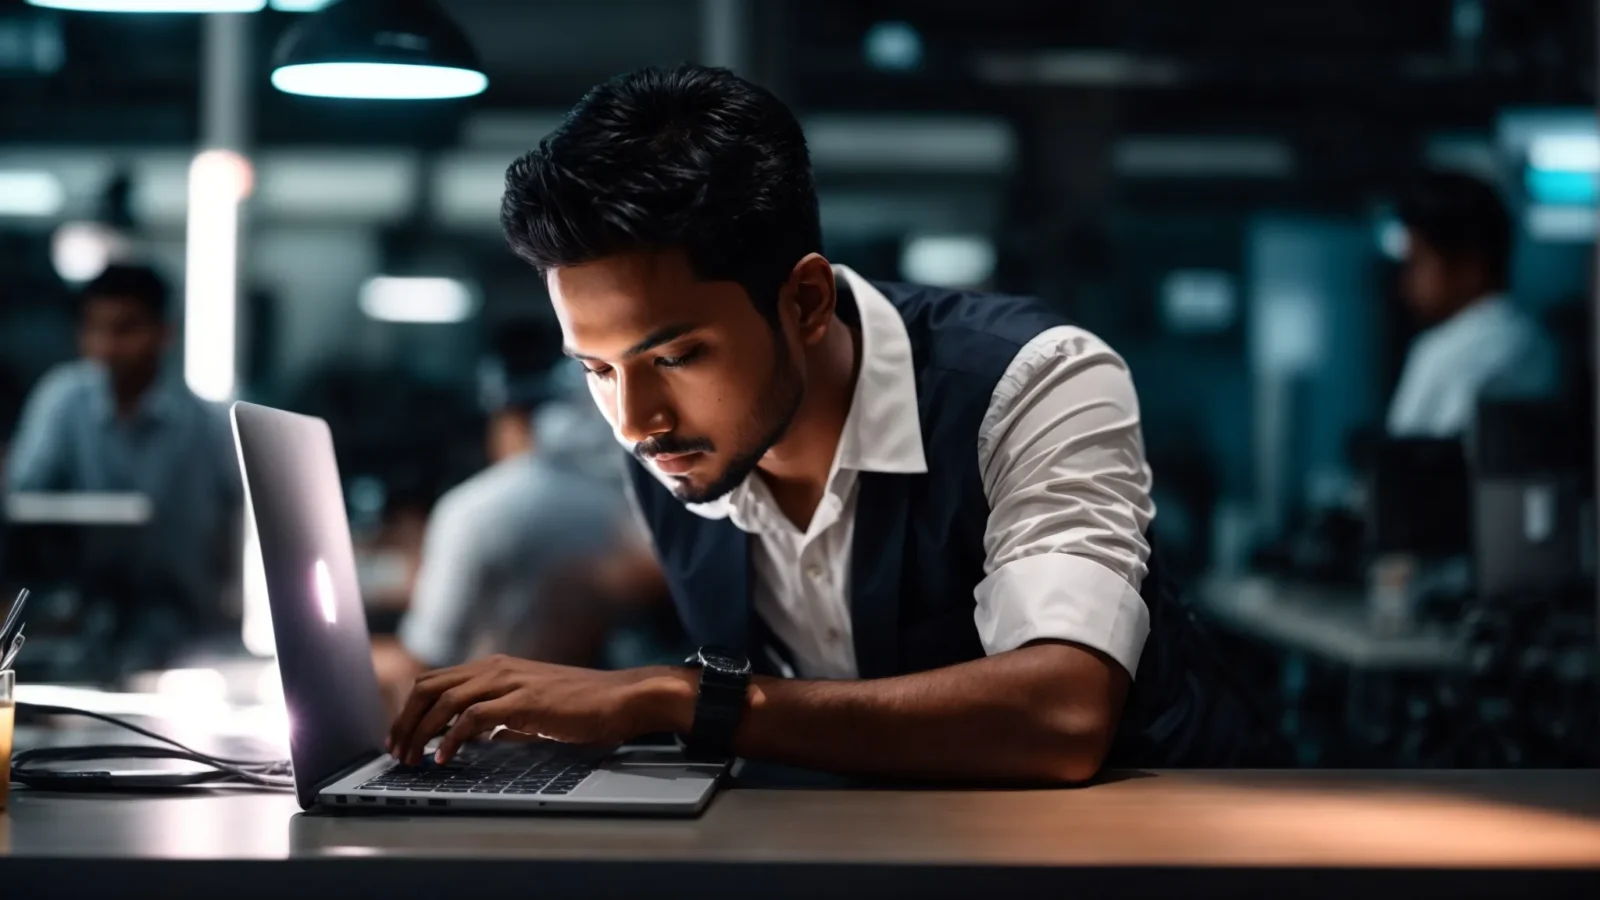 a young bangladeshi entrepreneur is intently looking at a glowing laptop screen in a bright, modern workspace.